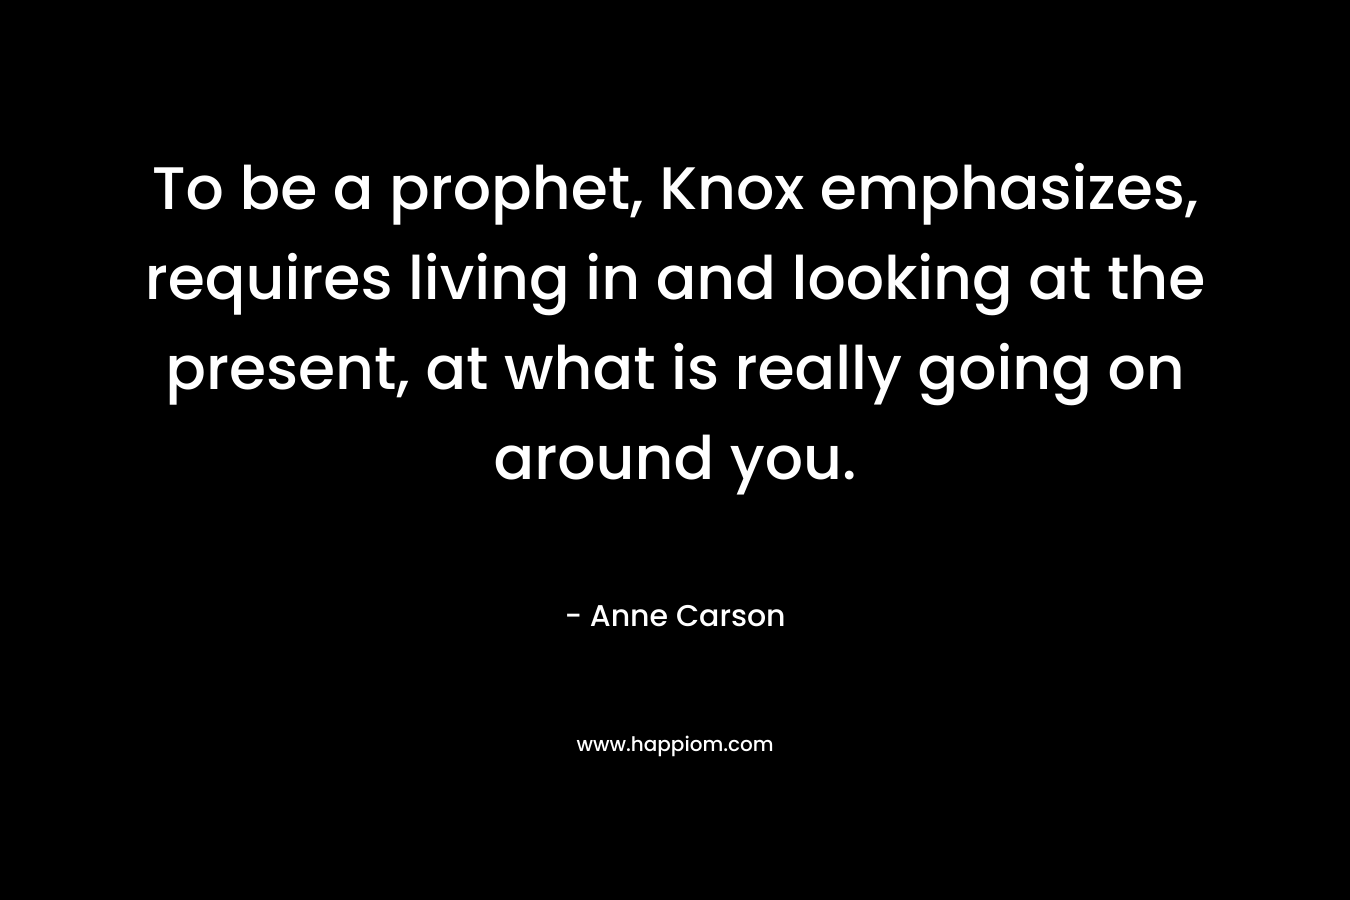 To be a prophet, Knox emphasizes, requires living in and looking at the present, at what is really going on around you. – Anne Carson